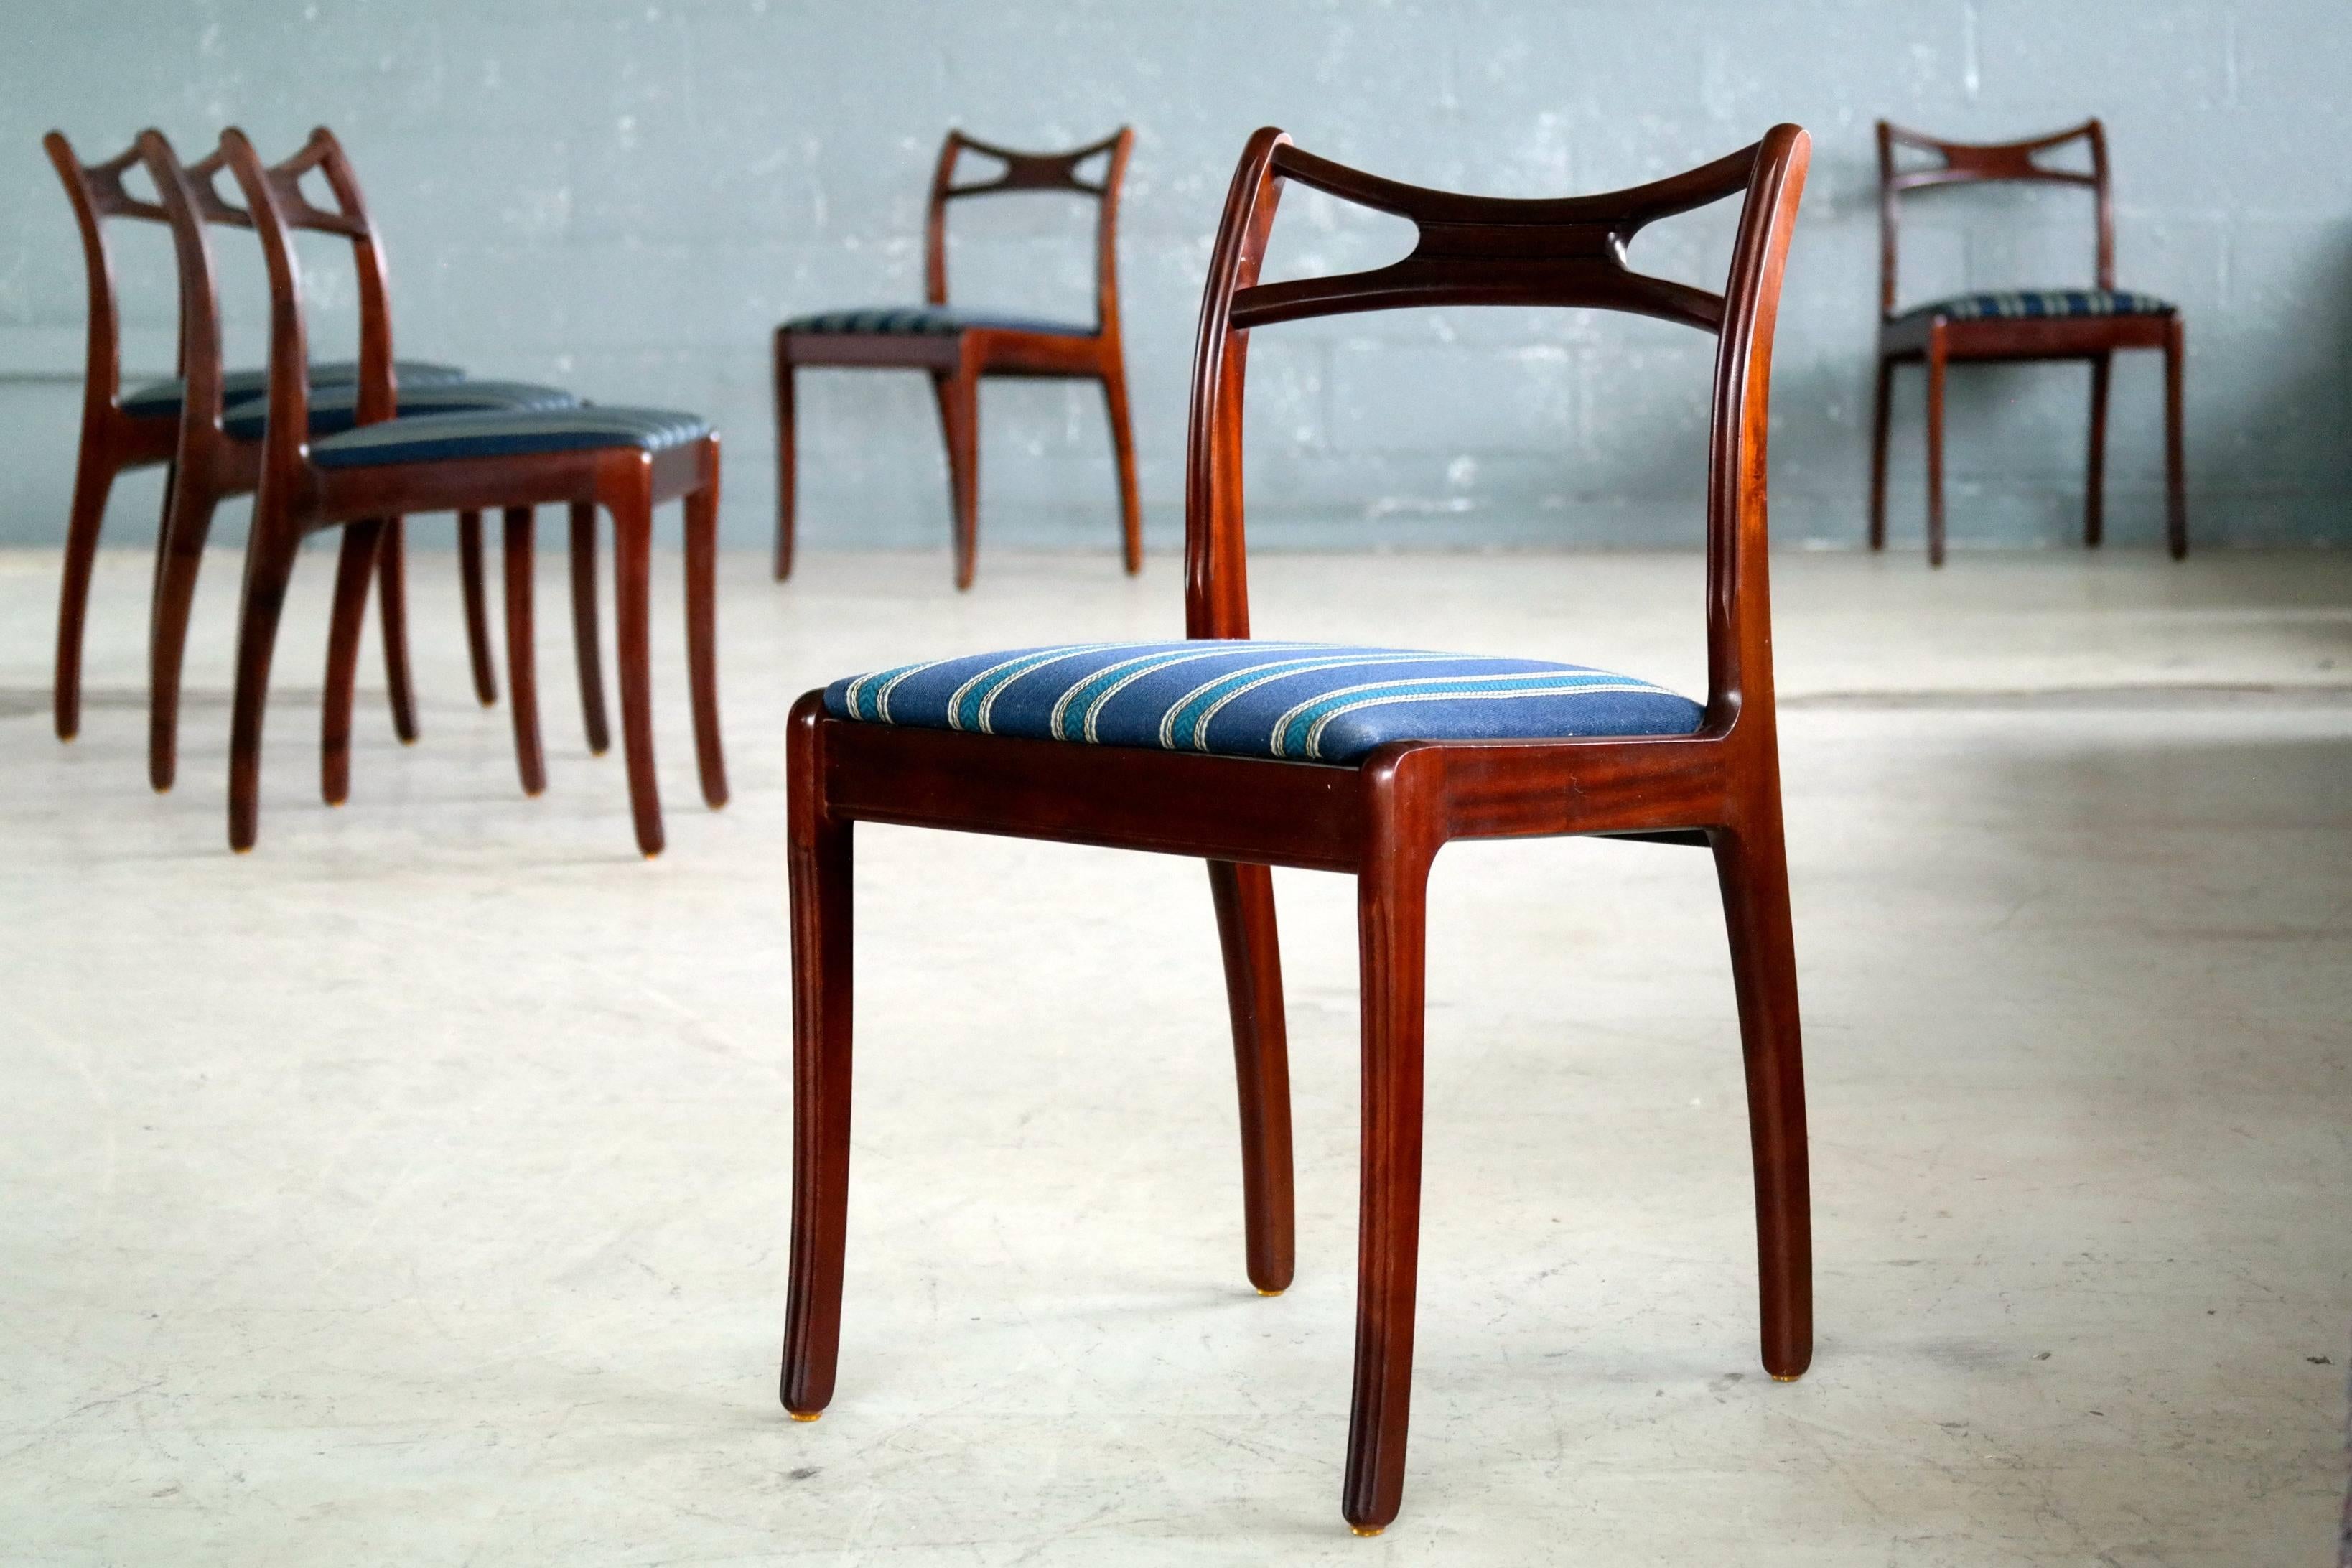 Very stylish 1950s Danish dining chairs in mahogany. Style reminiscent of Ole Wanscher's Rungstedlund chair. An interesting design element is the bayonet fluted front legs a design that is continued on the back support. Nice deep color and grain